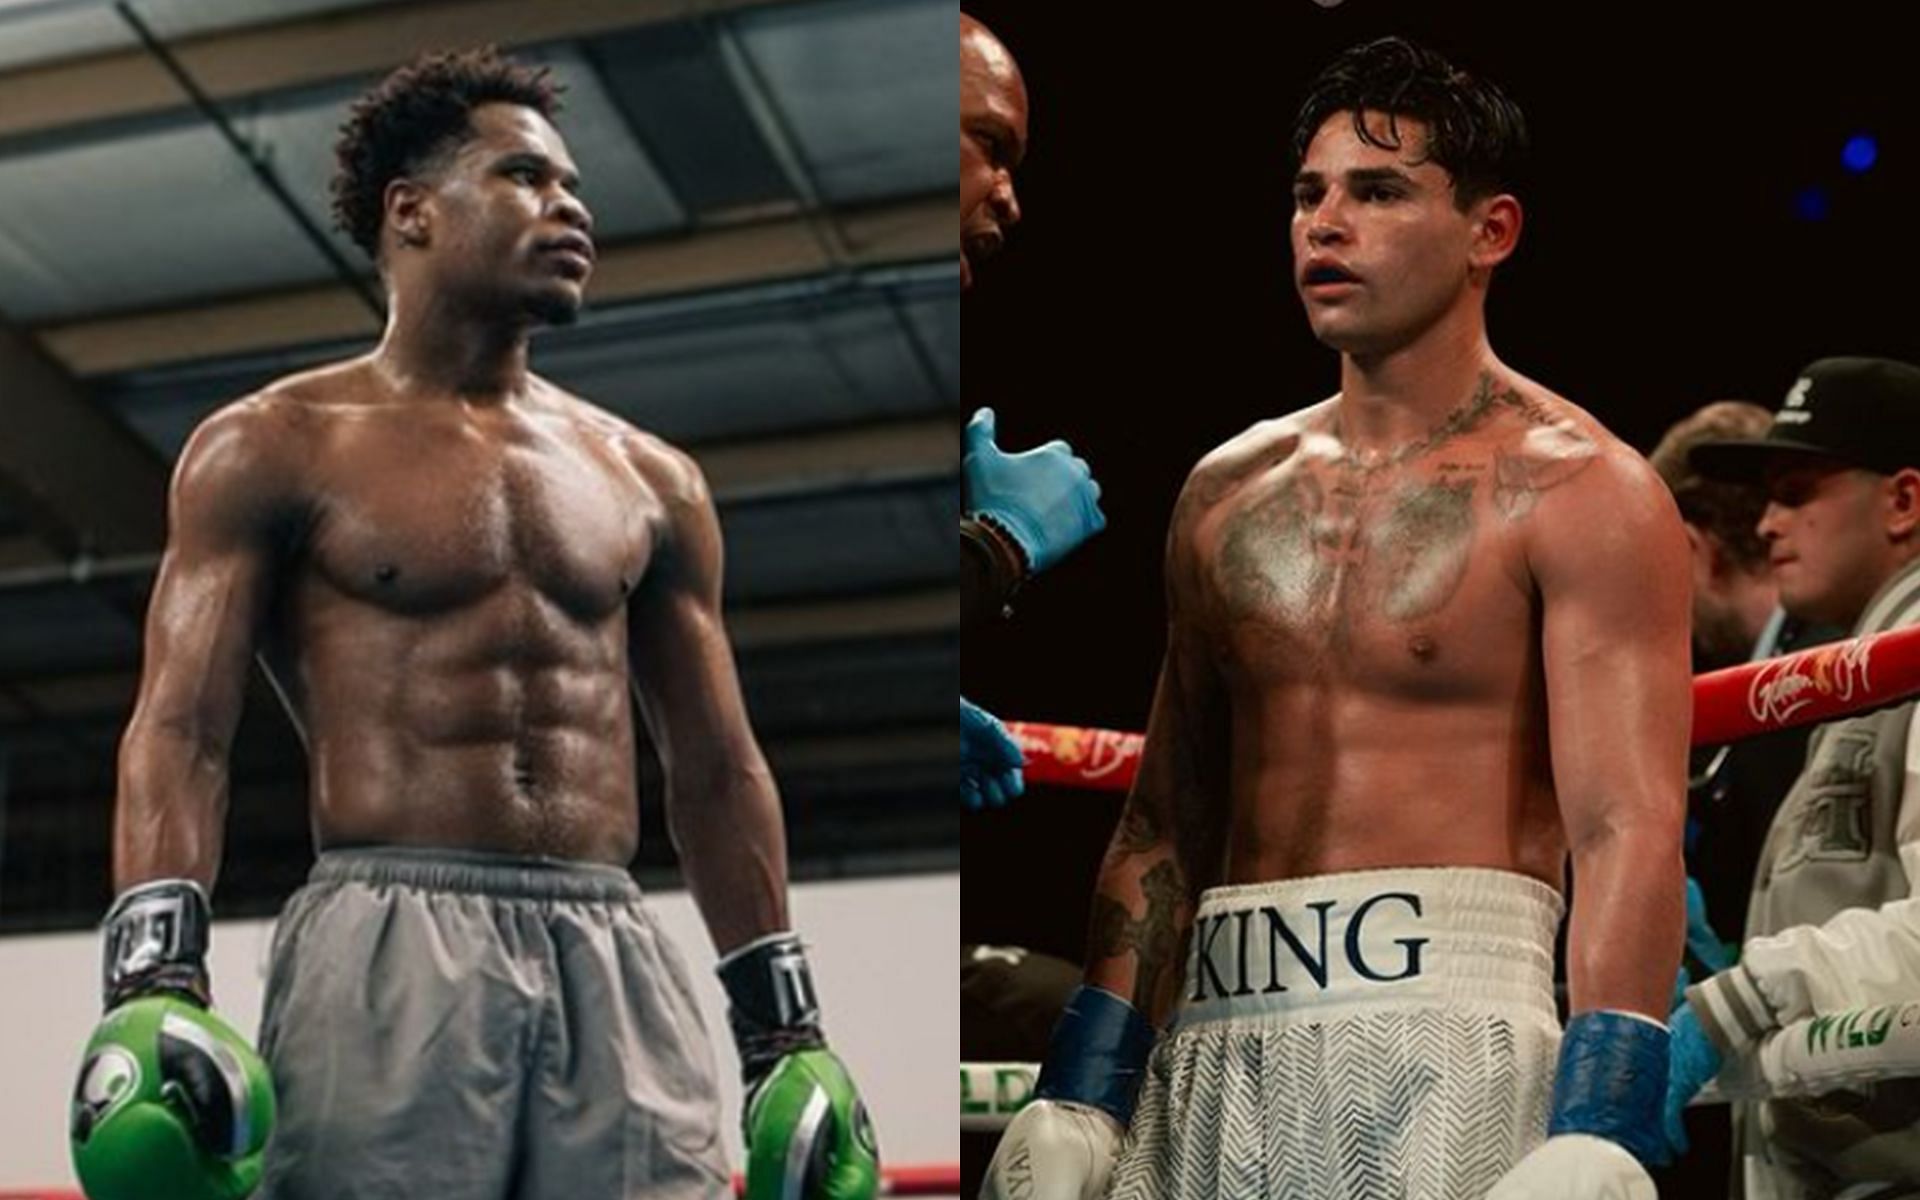 Devin Haney (left) firmly believes that Ryan Garcia (right) took PEDs on purpose [Images Courtesy: @realdevinhaney and @kingryan Instagram]